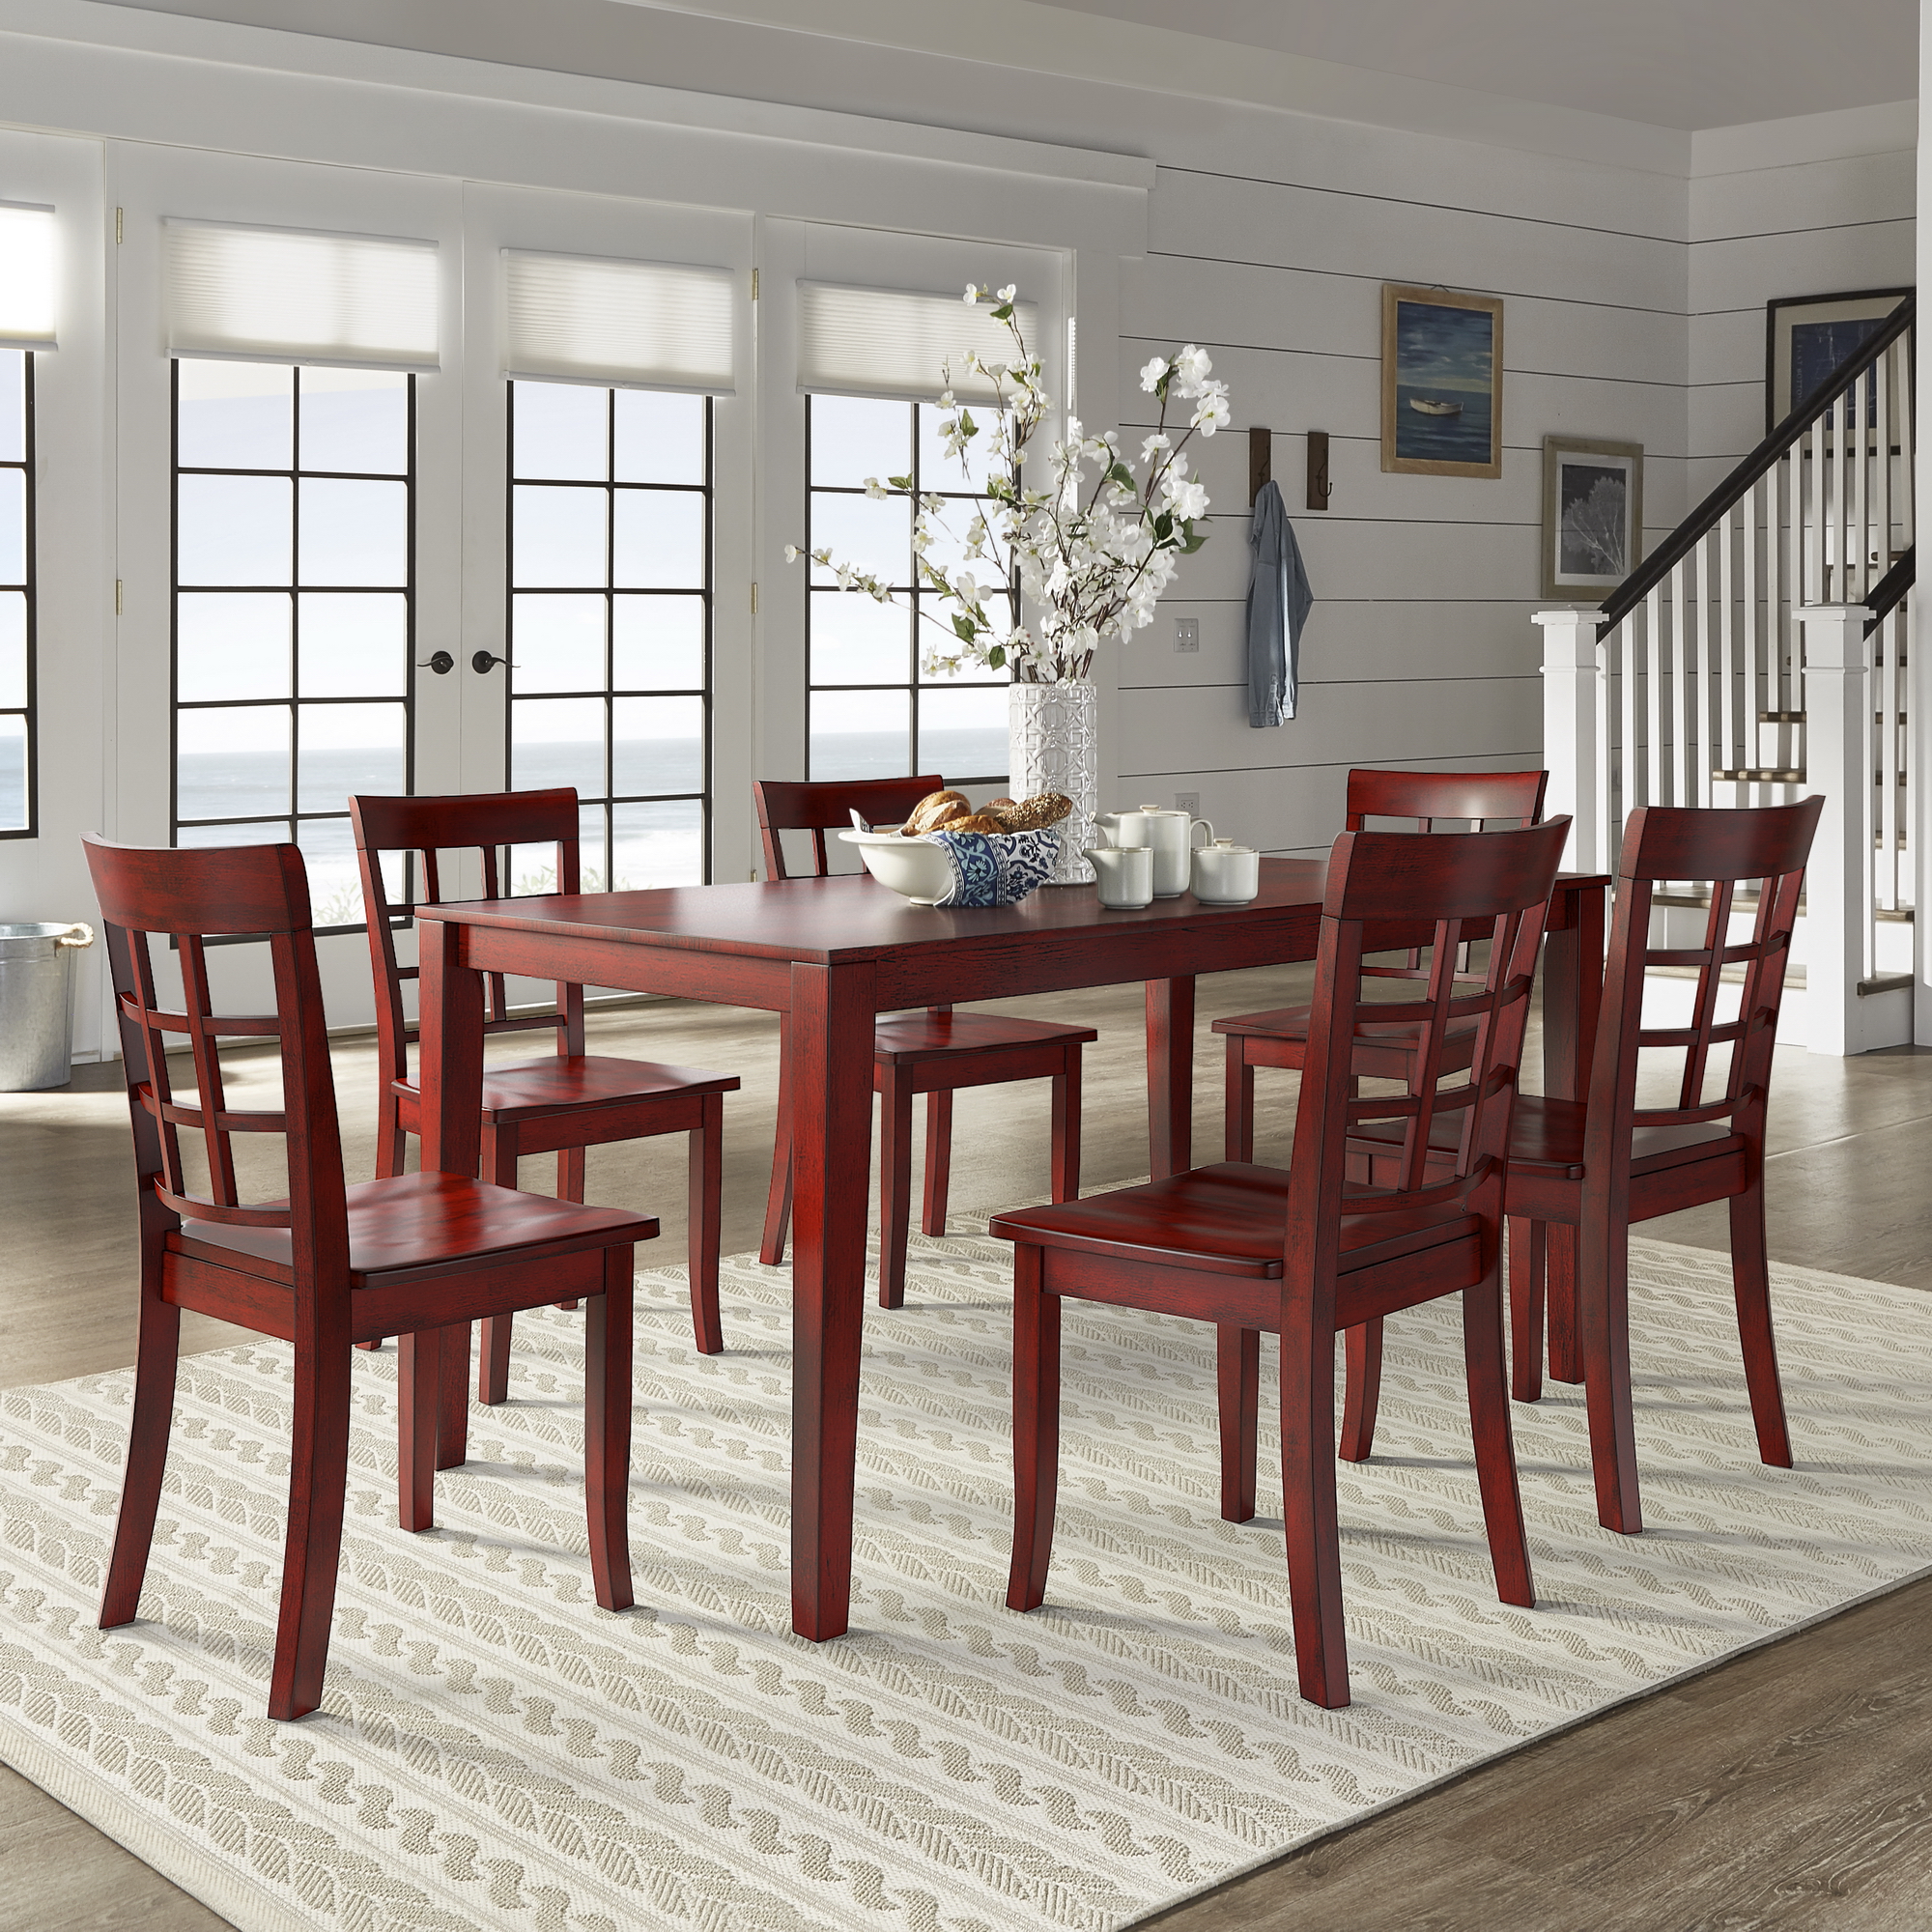 60-inch Rectangular Antique Berry Red Dining Set